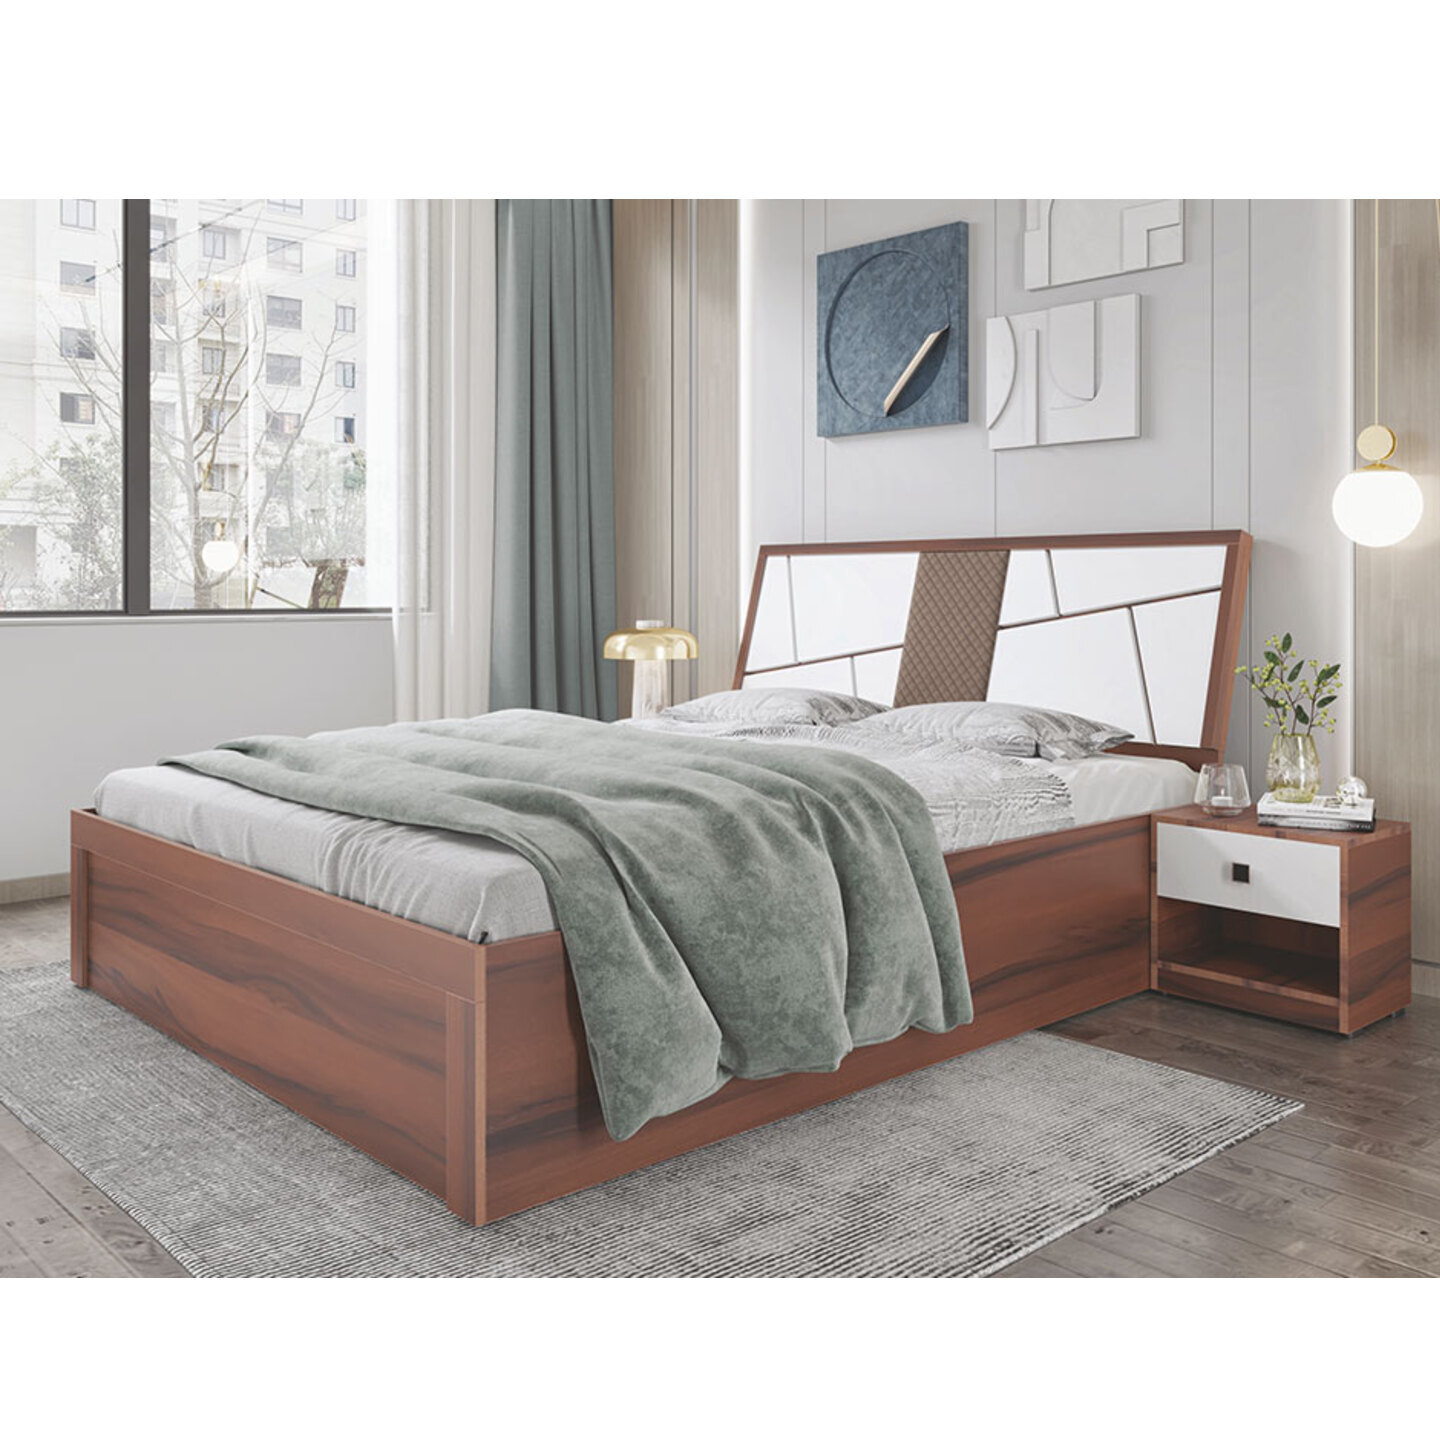 RLF King Size Bed 78"x72" Prime in Brown Colour